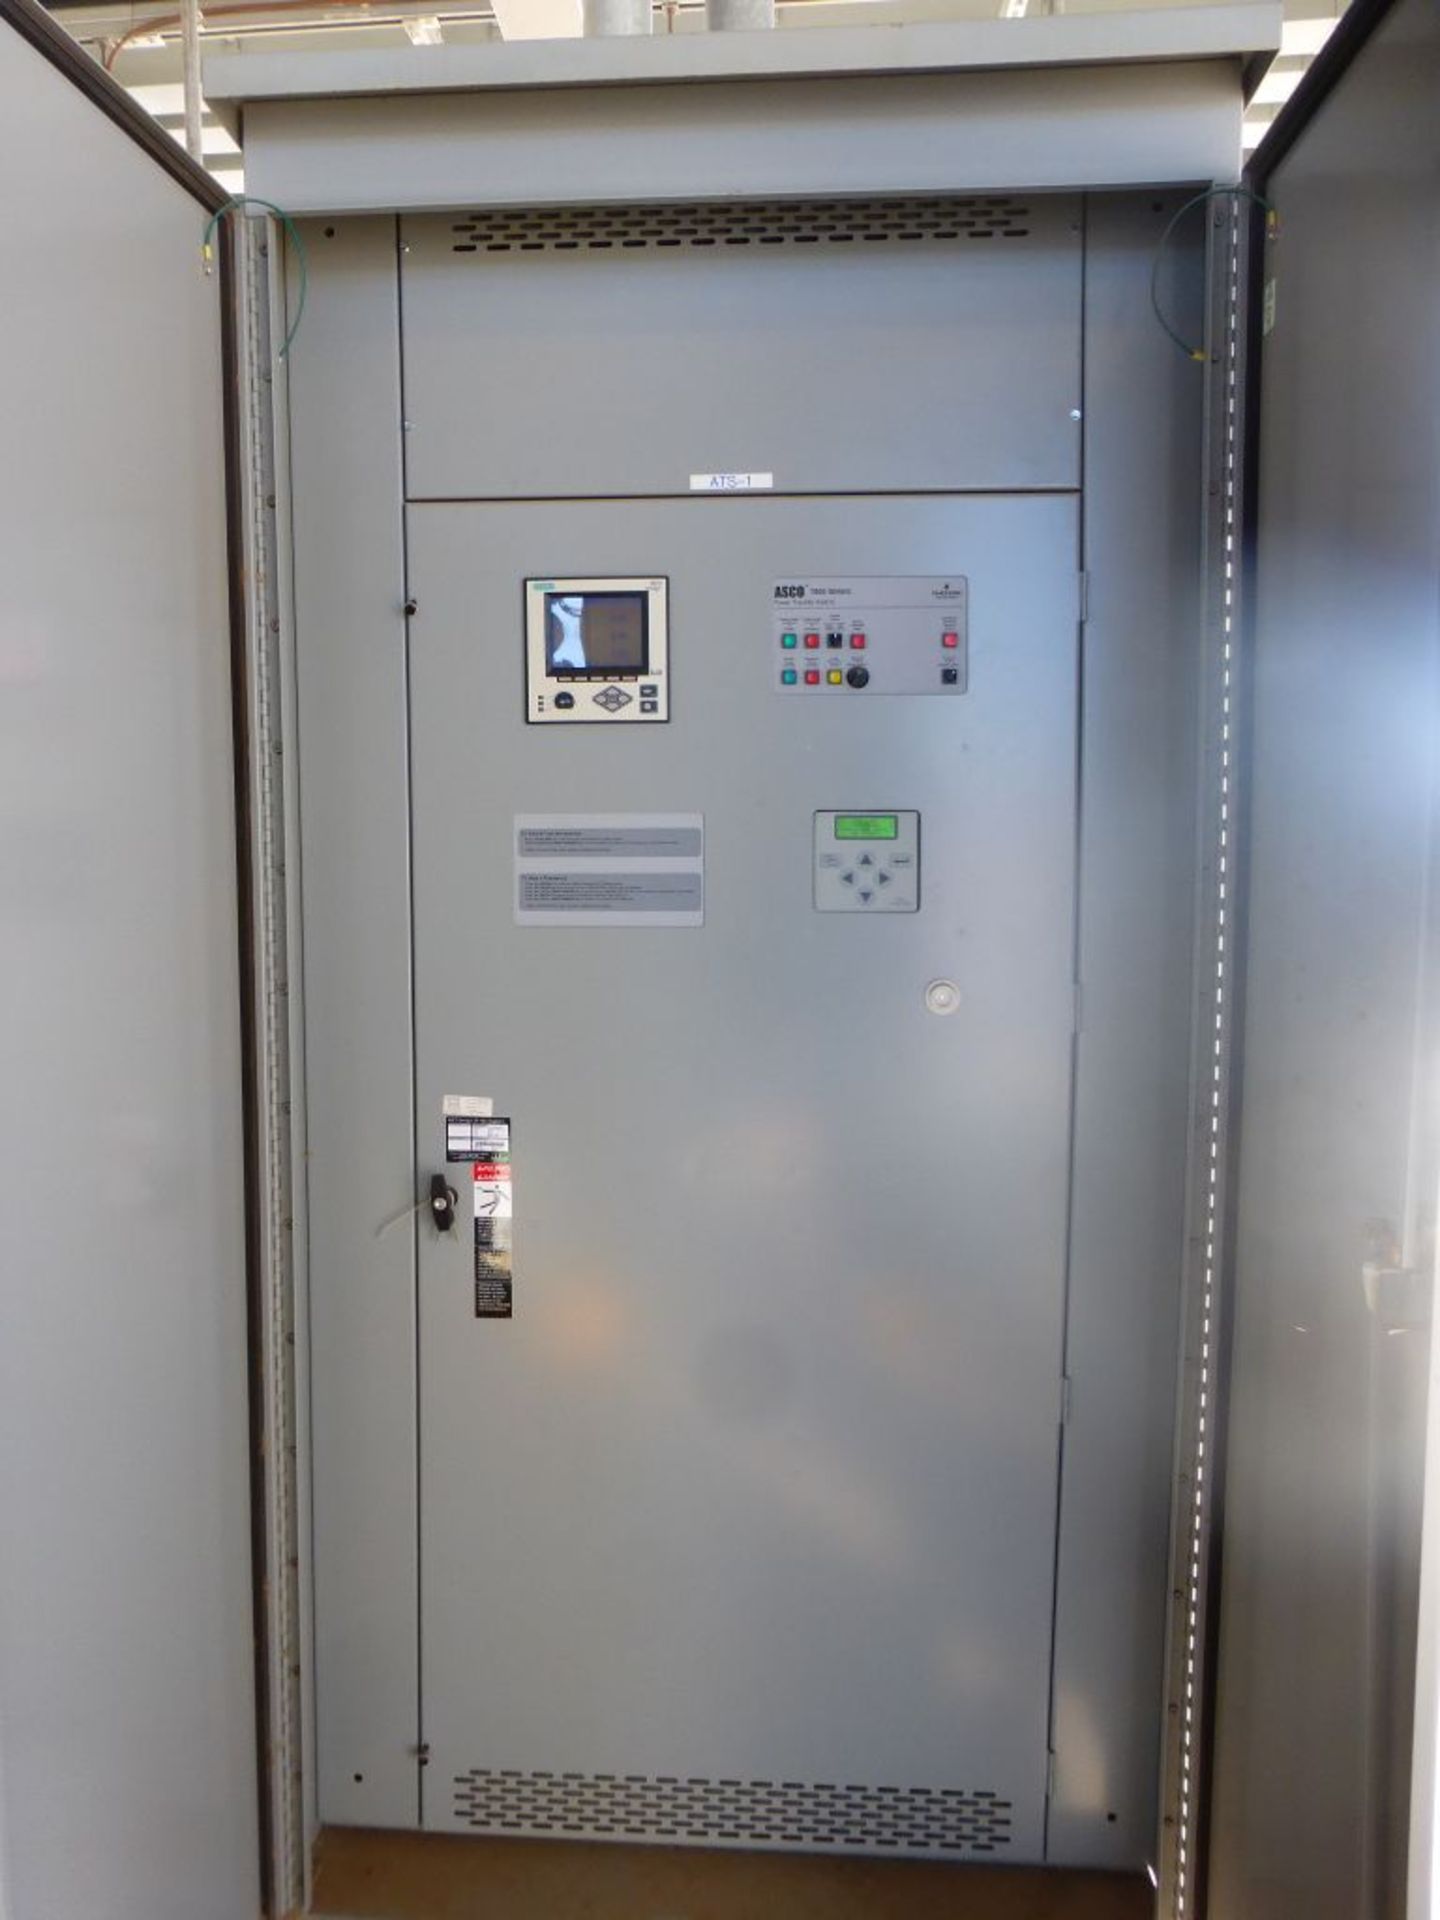 ASCO 7000 Series Power Transfer Switch | Lot Loading Fee: $50 | 800A; 480V; Tag: 233653 - Image 4 of 12